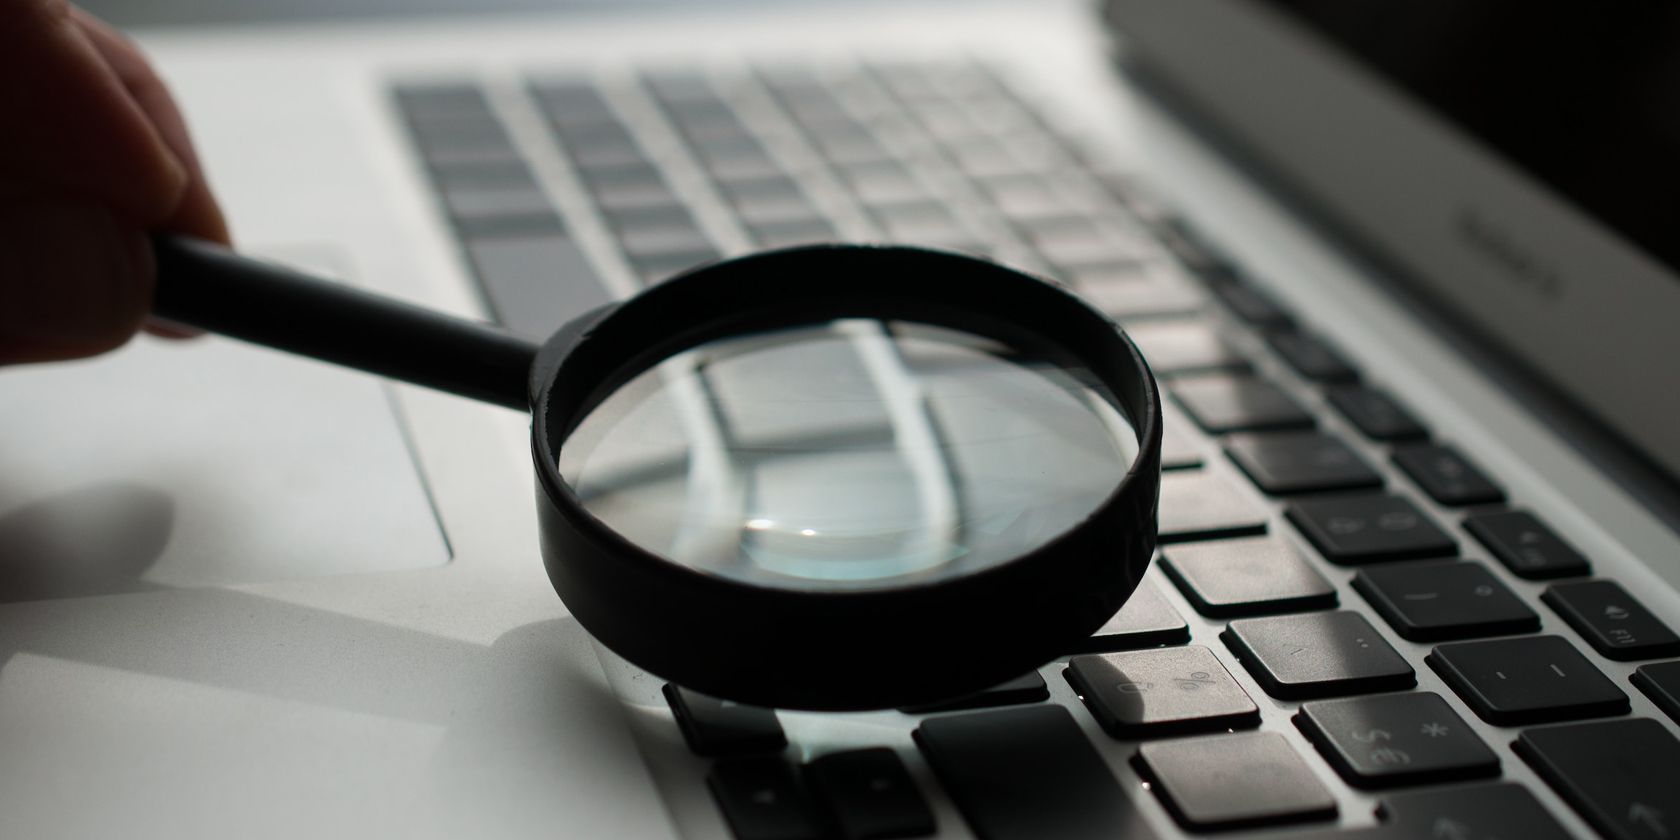 magnifying glass over a grey laptop keyboard